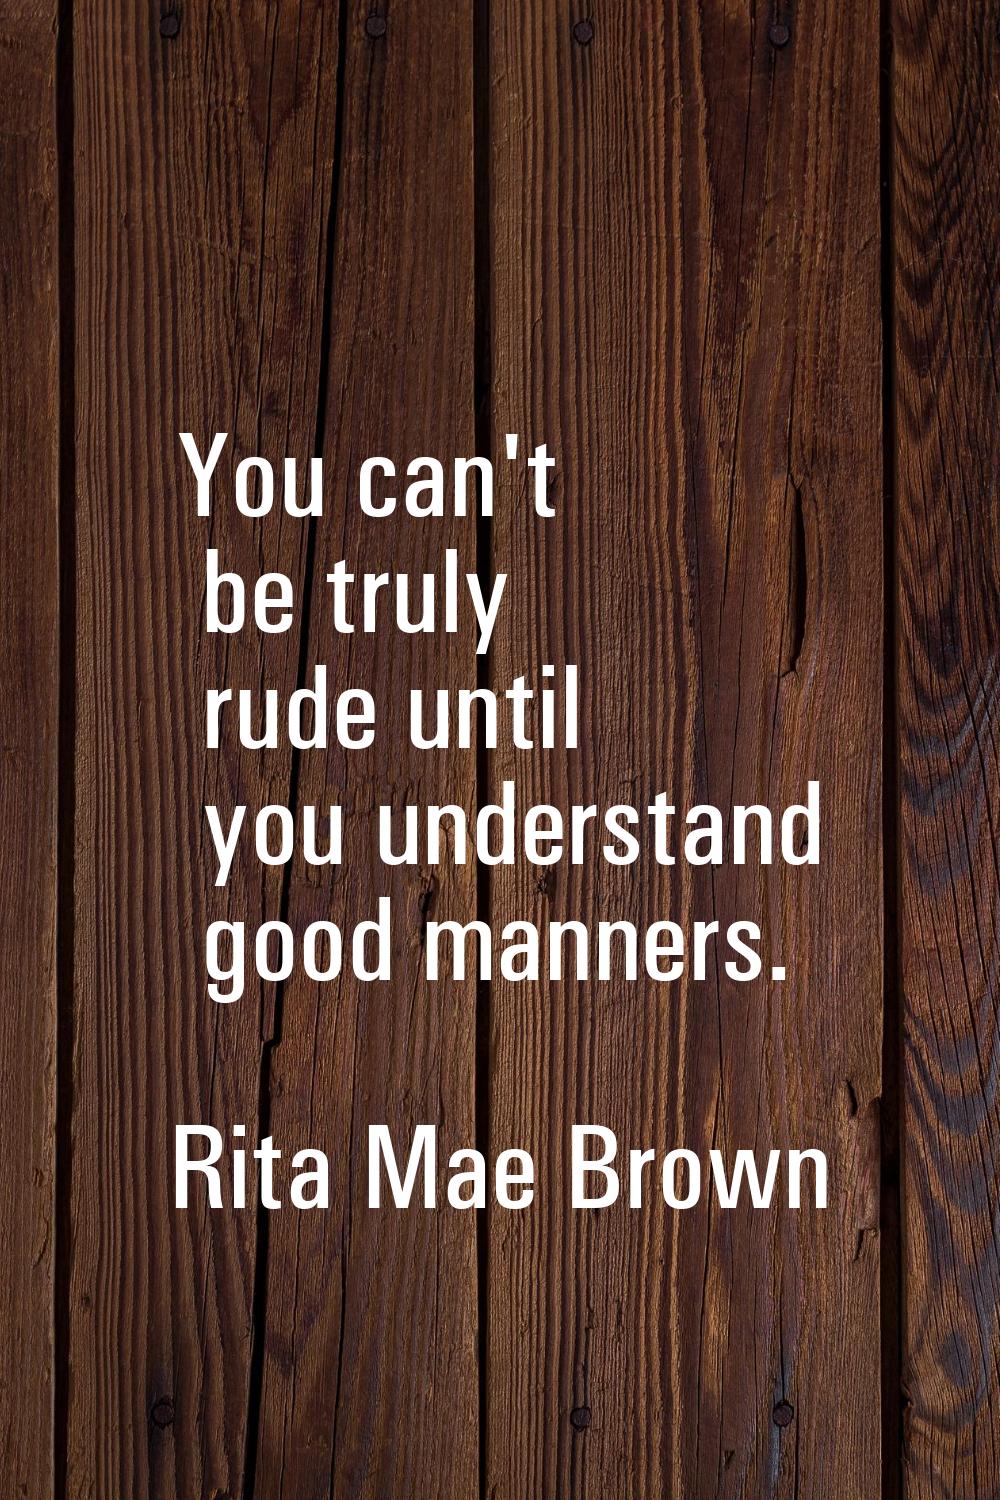 You can't be truly rude until you understand good manners.